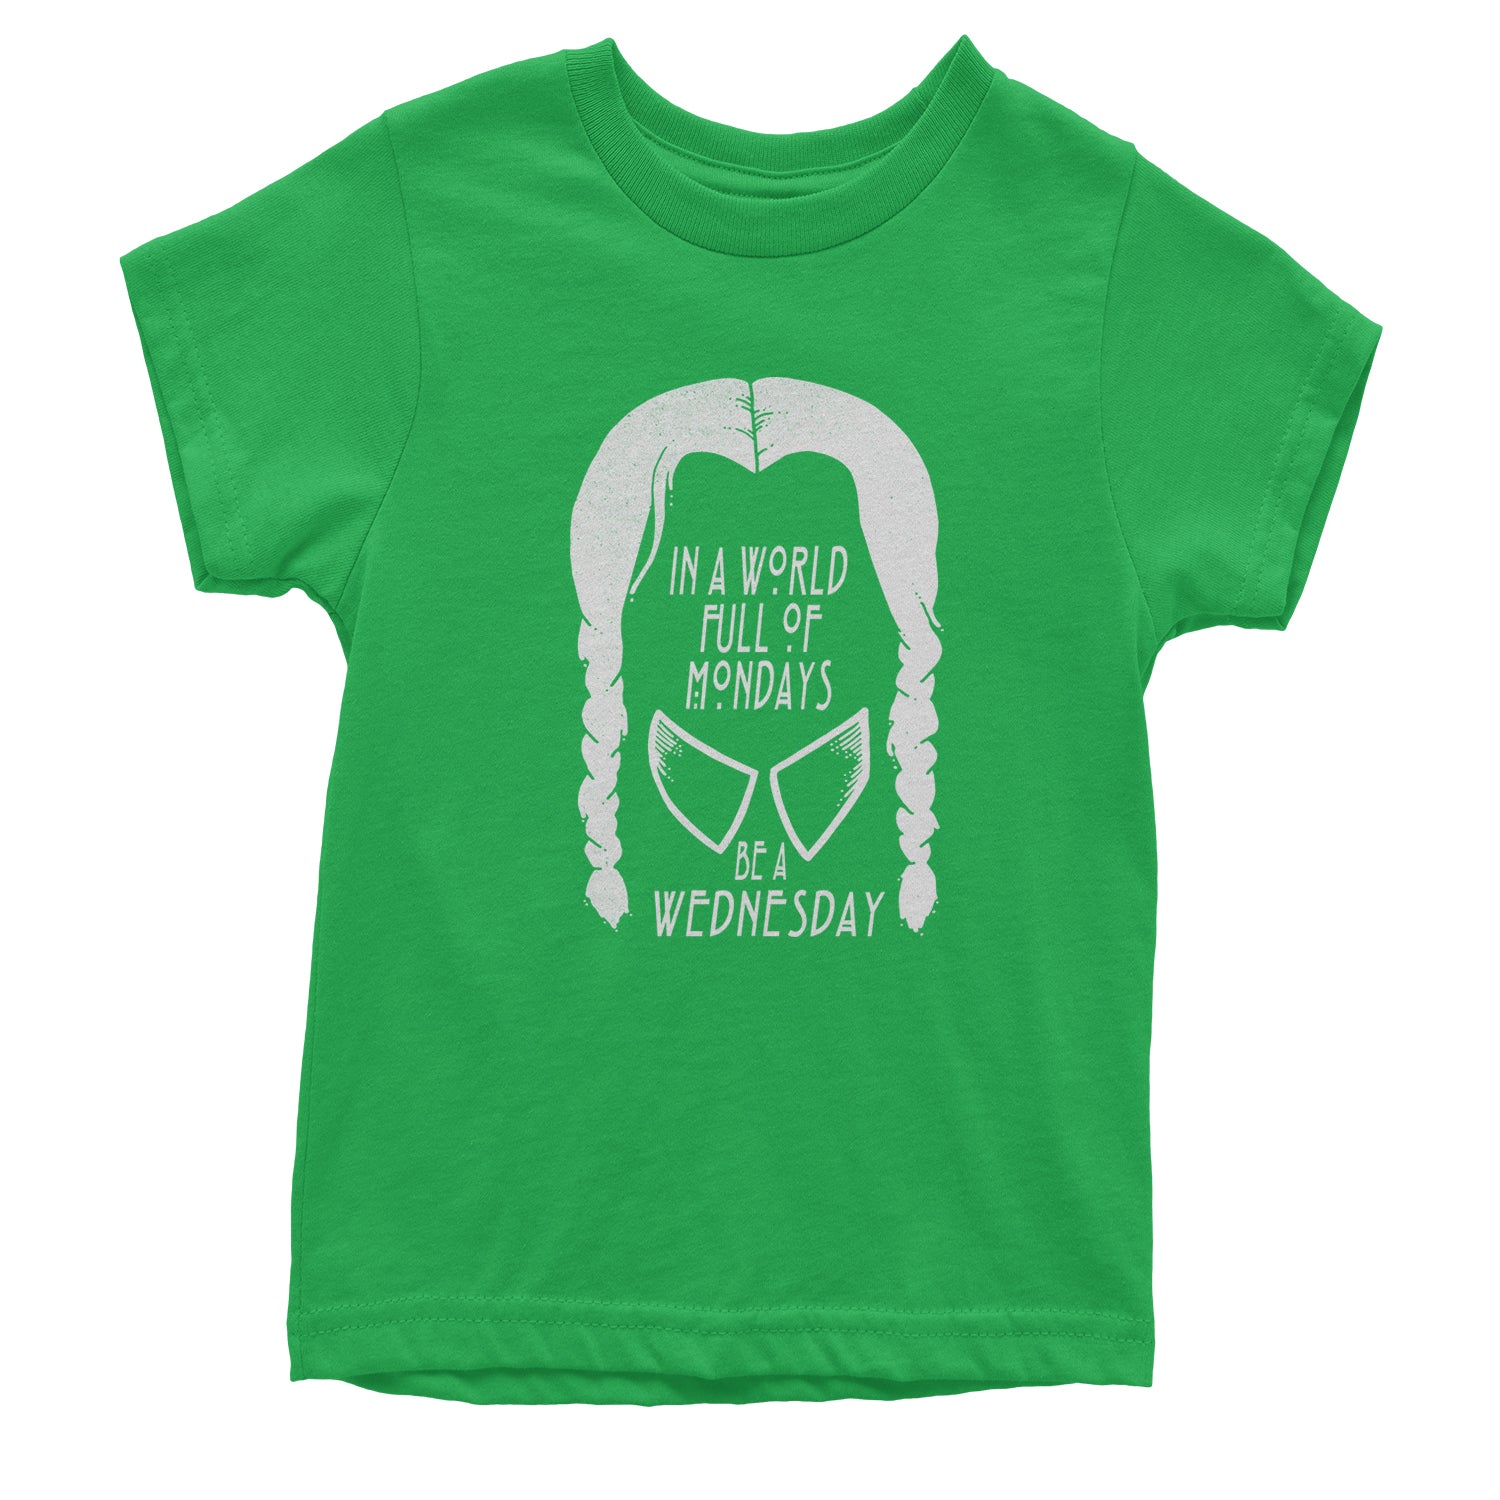 In A World Full Of Mondays, Be A Wednesday Youth T-shirt academy, jericho, more, never, nevermore, vermont, Wednesday by Expression Tees